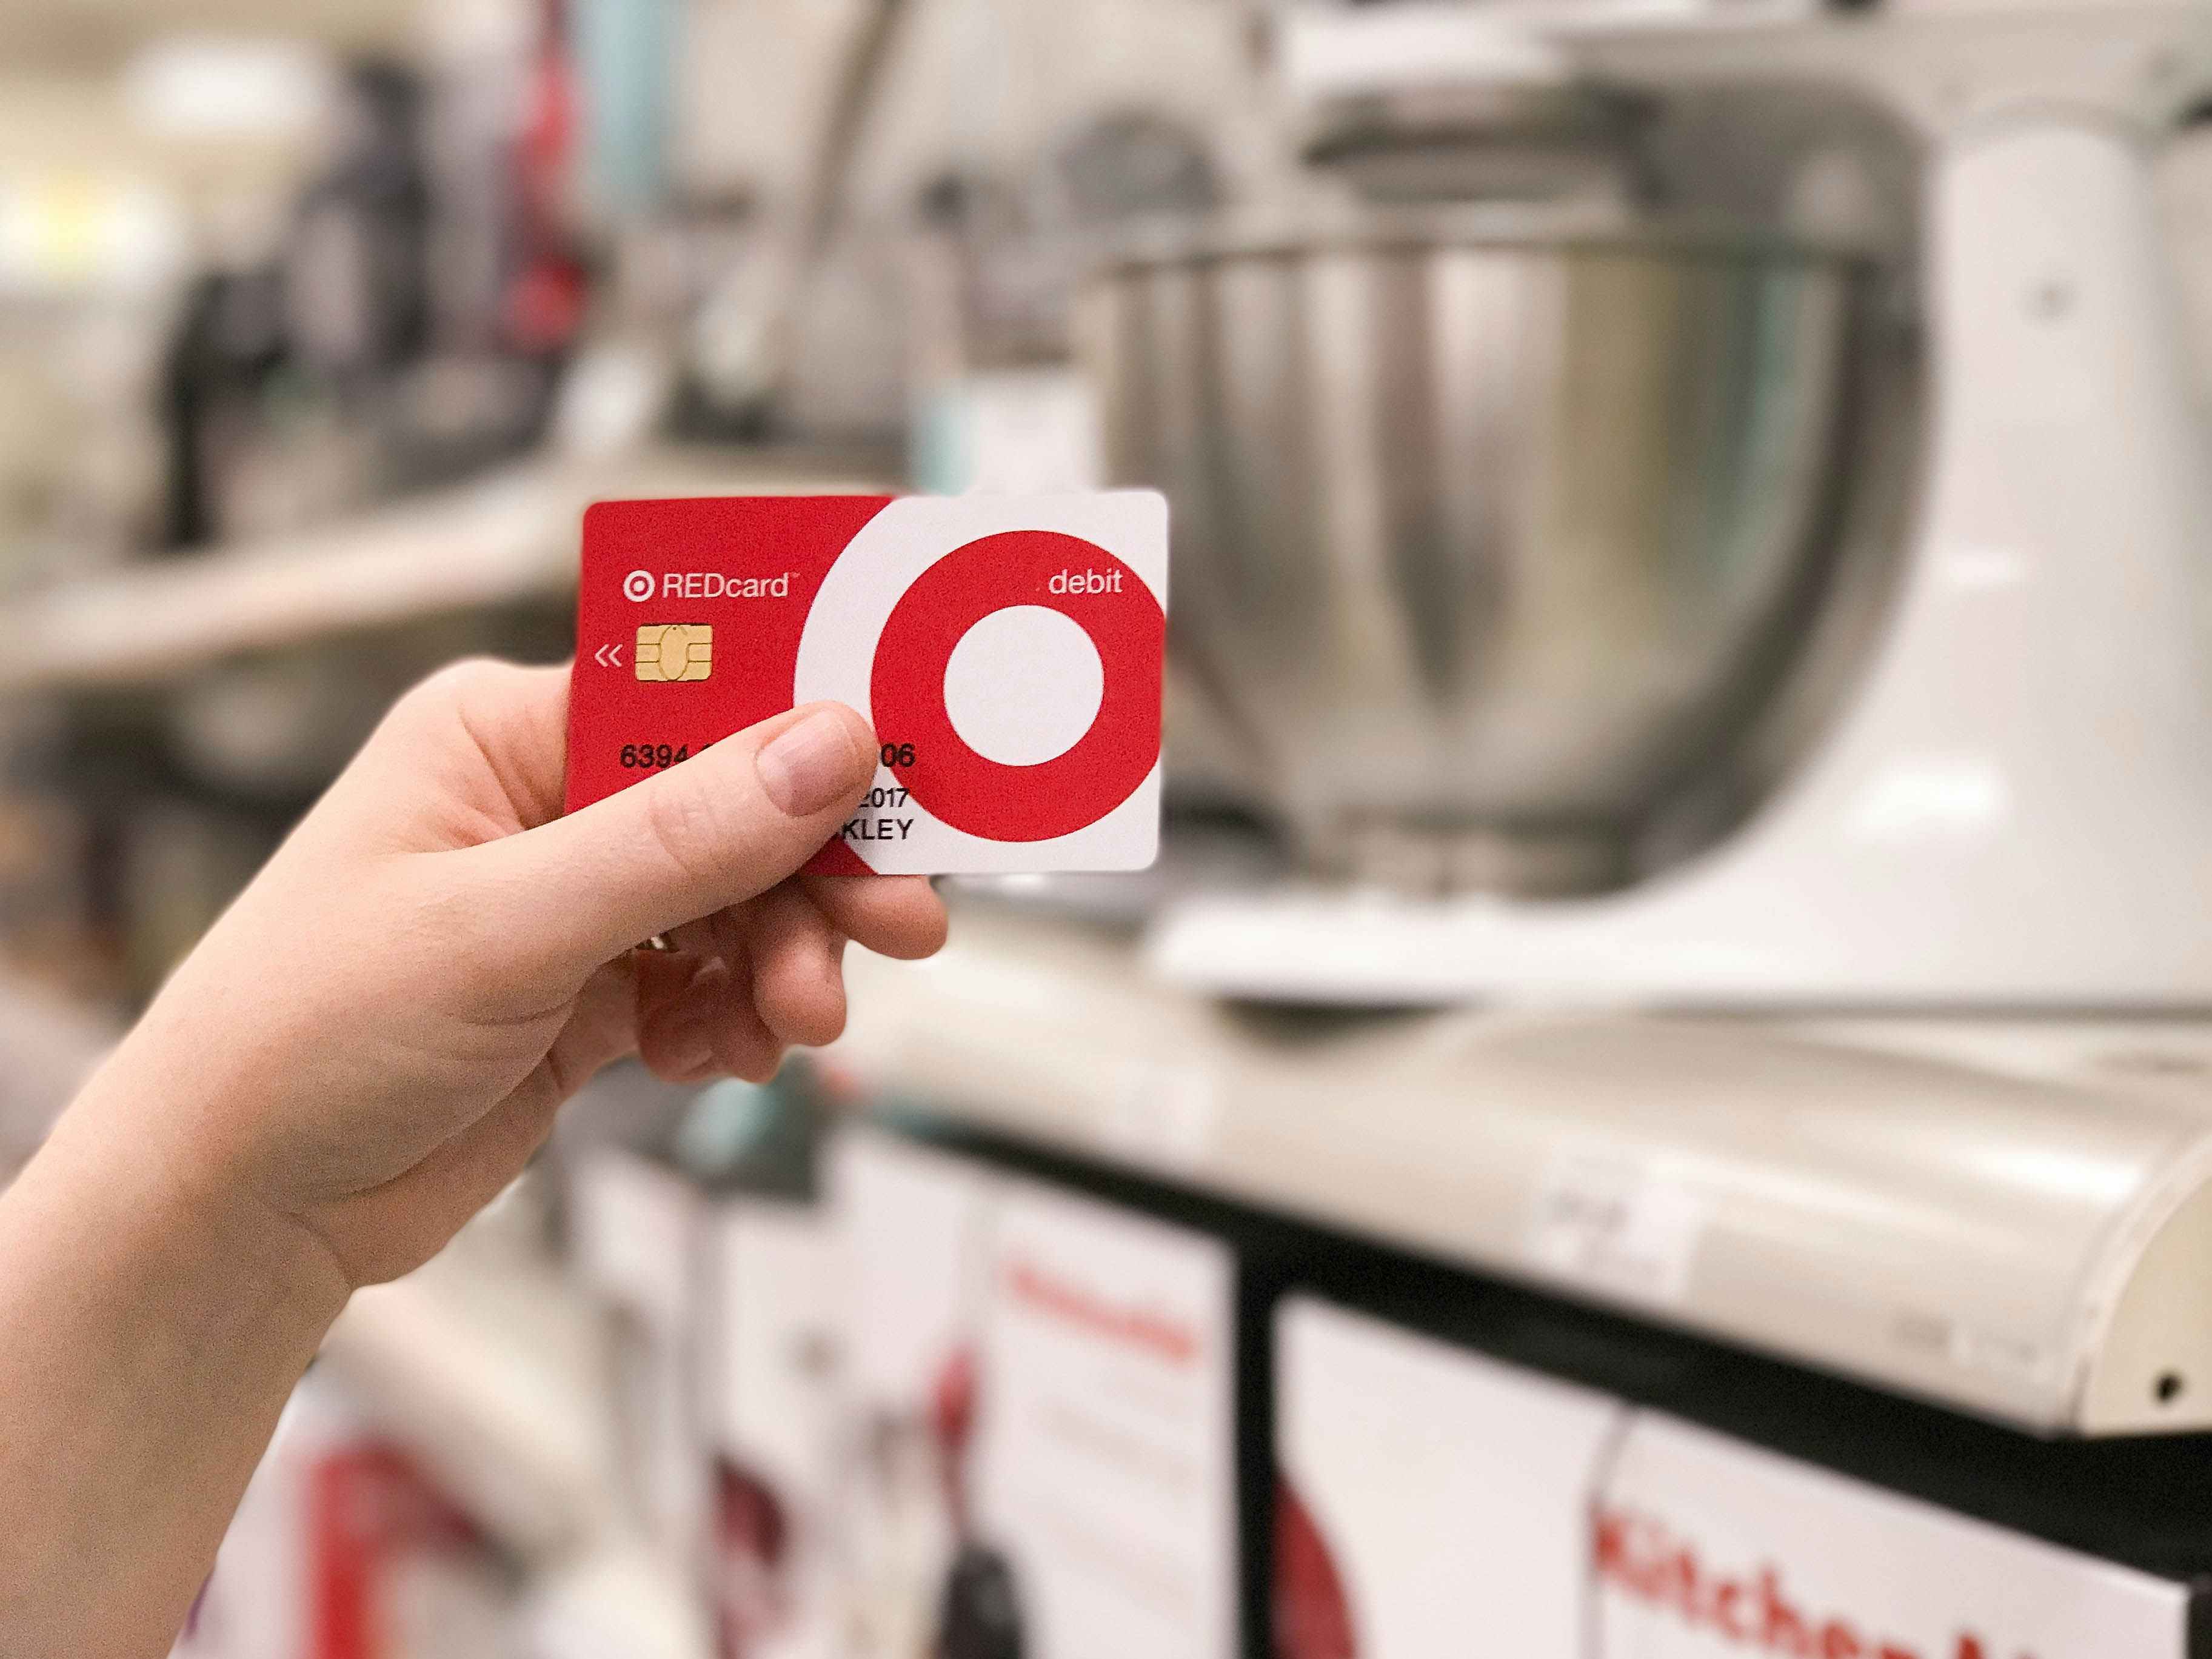 A Target Red card is held in front of Kitchenaid mixers at Target.